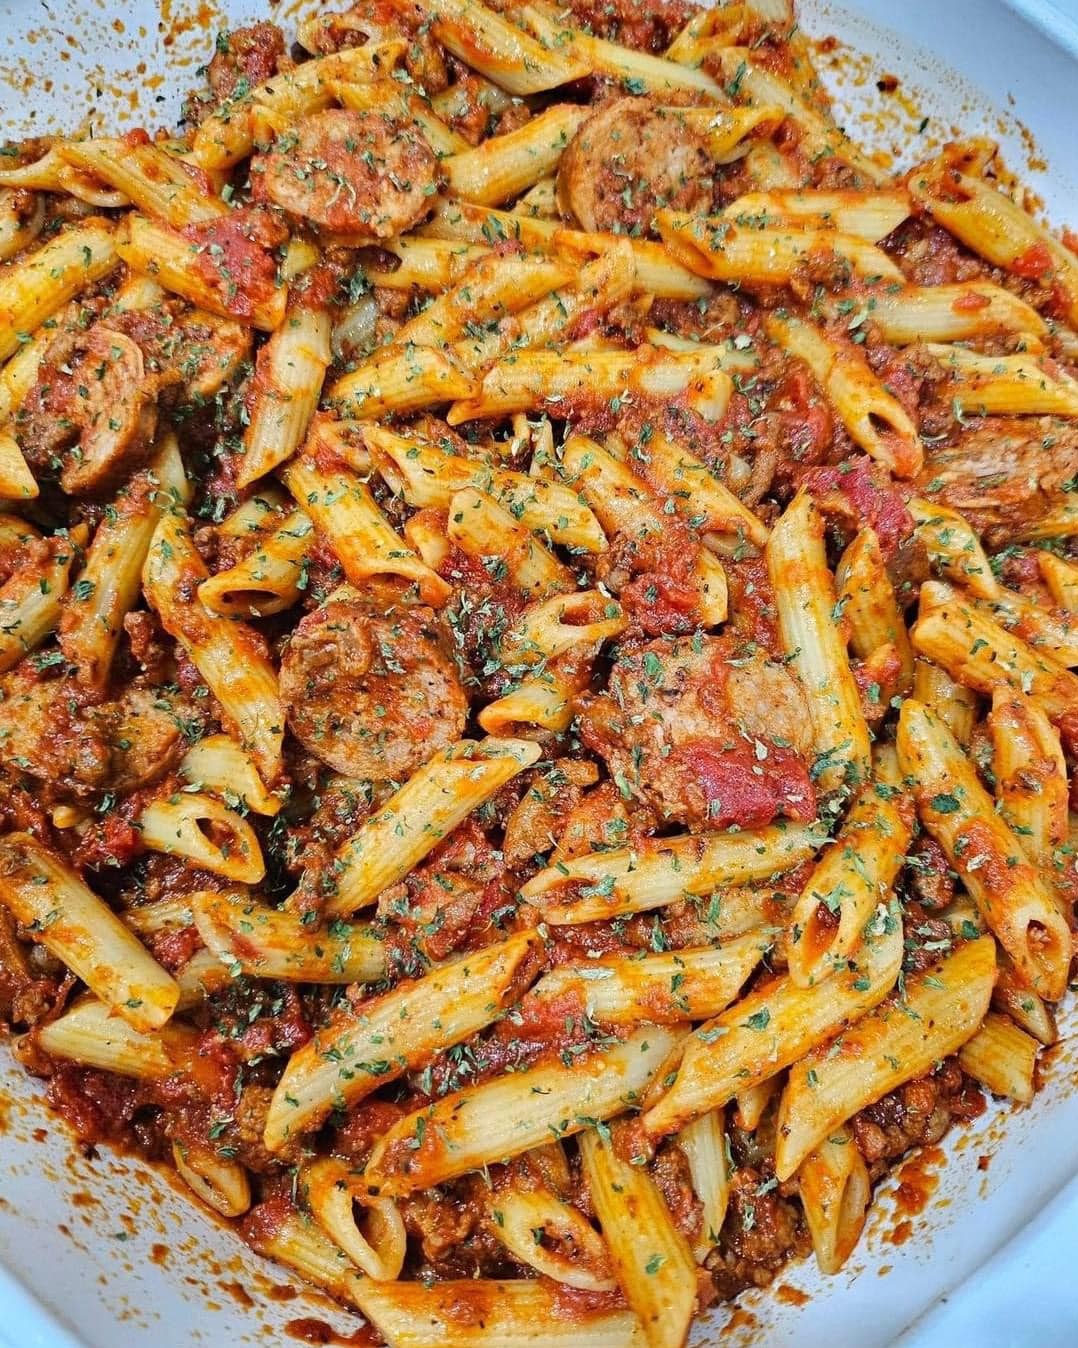 Penne with Italian Sausage - My Blog